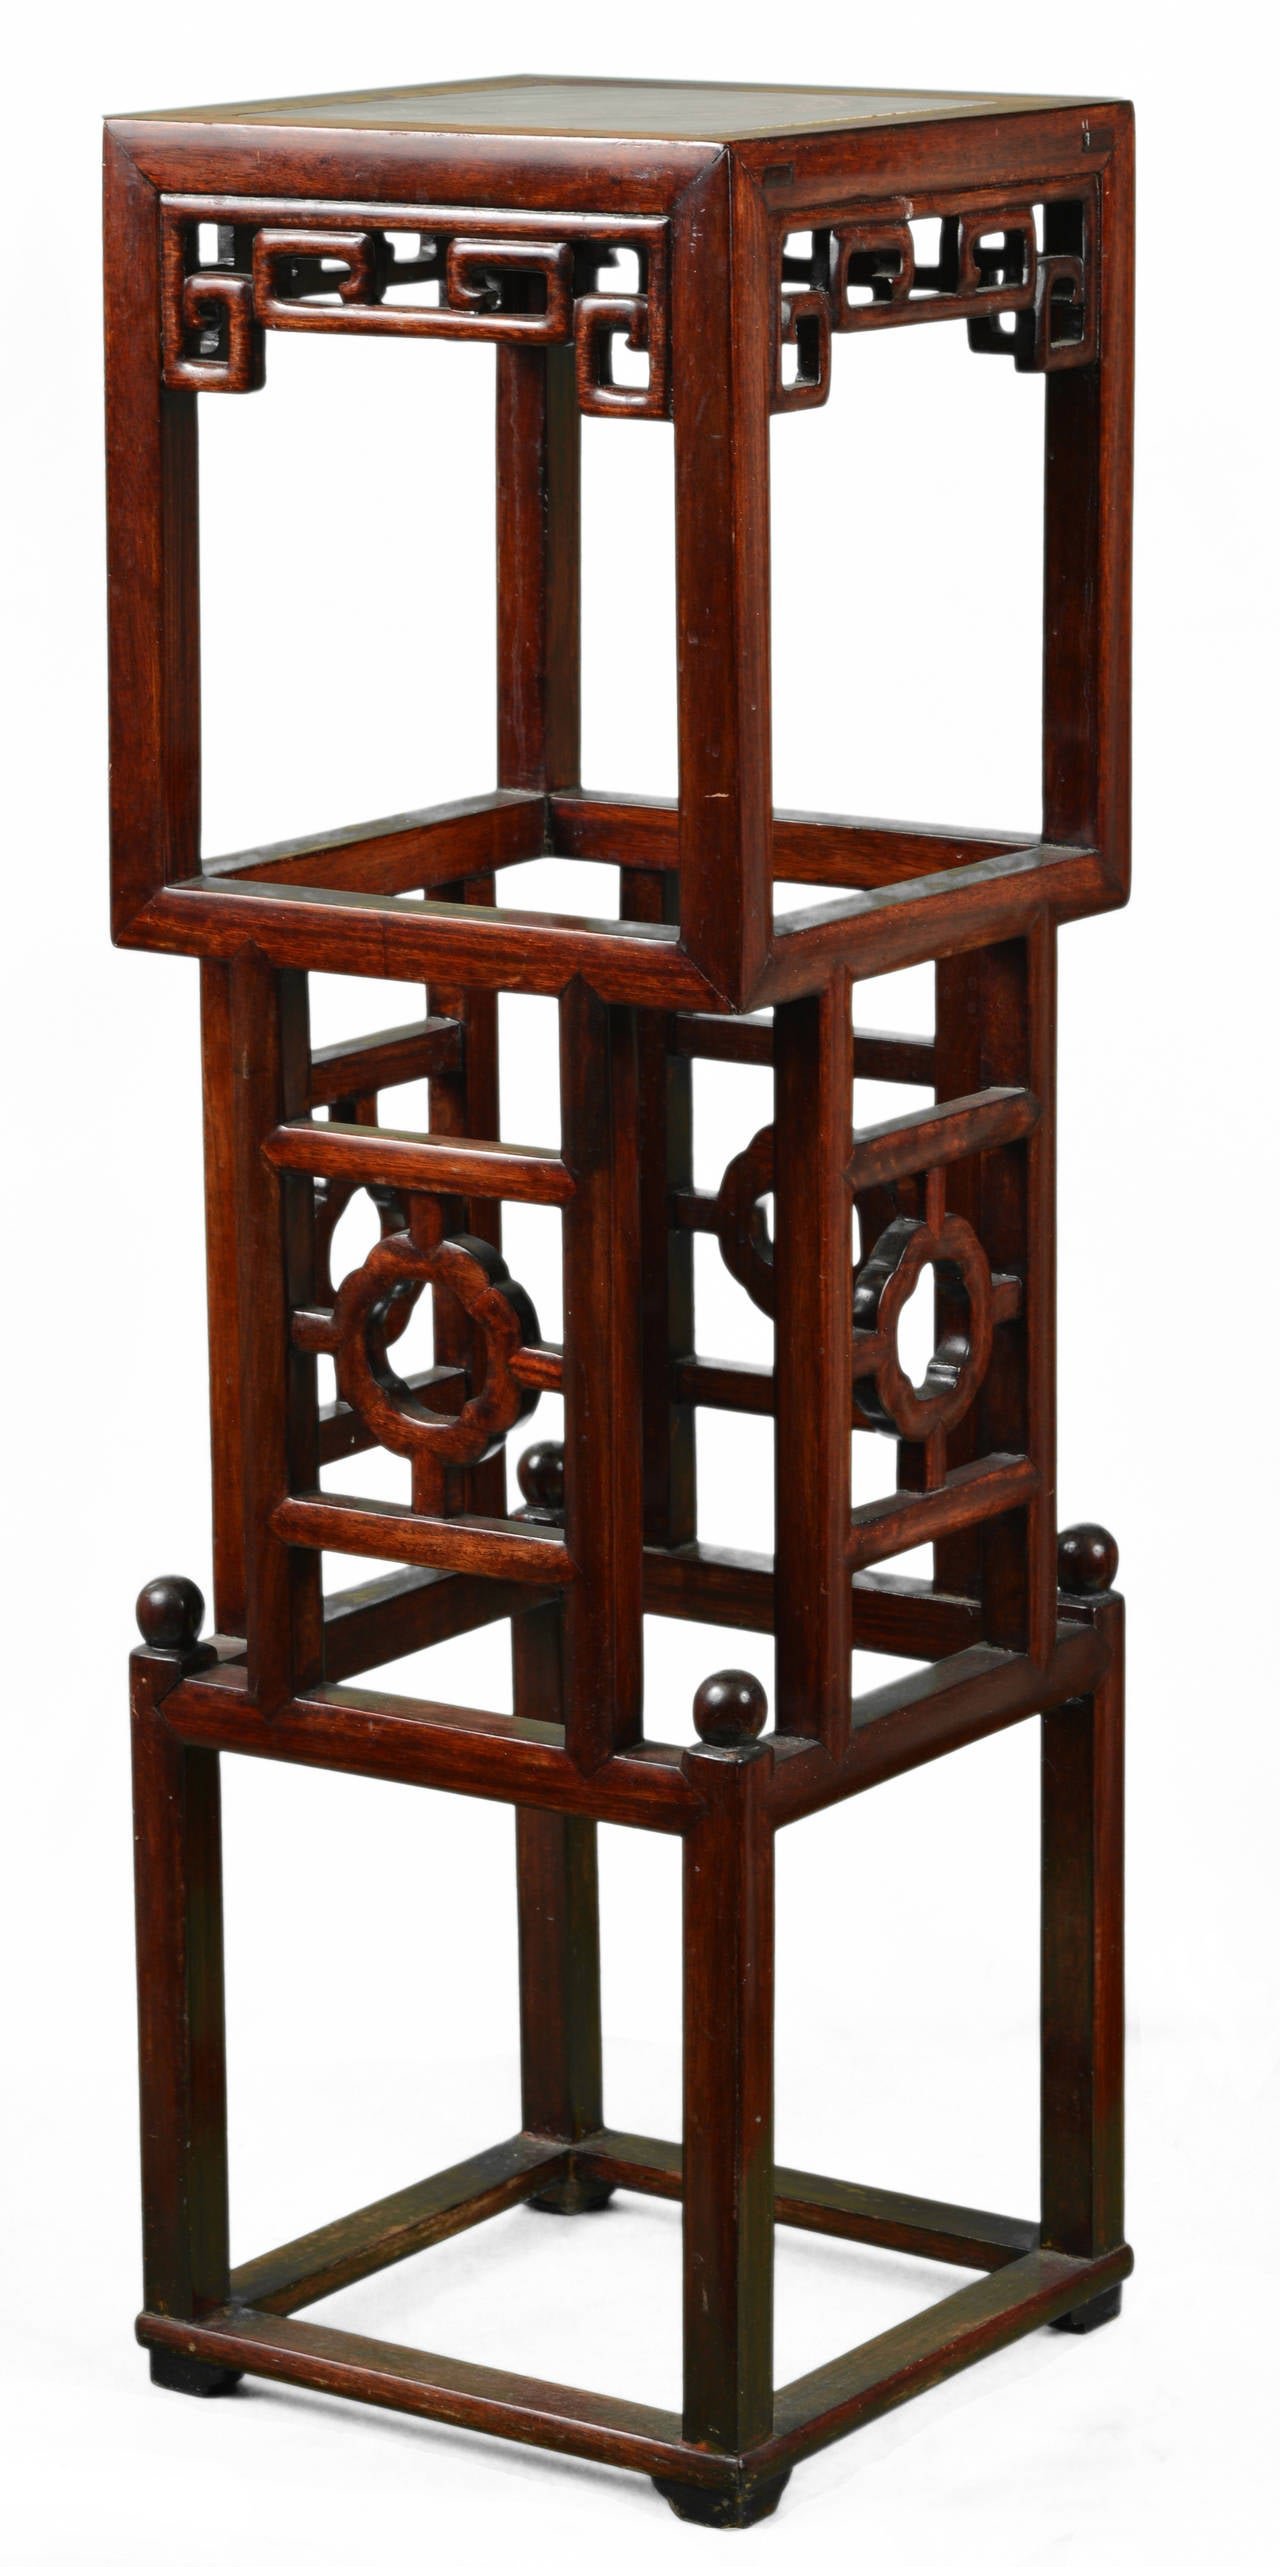 Chinese square plant Stand.
Comprising three overlapping open cages.
Marble top.

Pierced lattice of Chinese key motif on all sides of the skirt.
19th century.
Height 84.8 cm (33